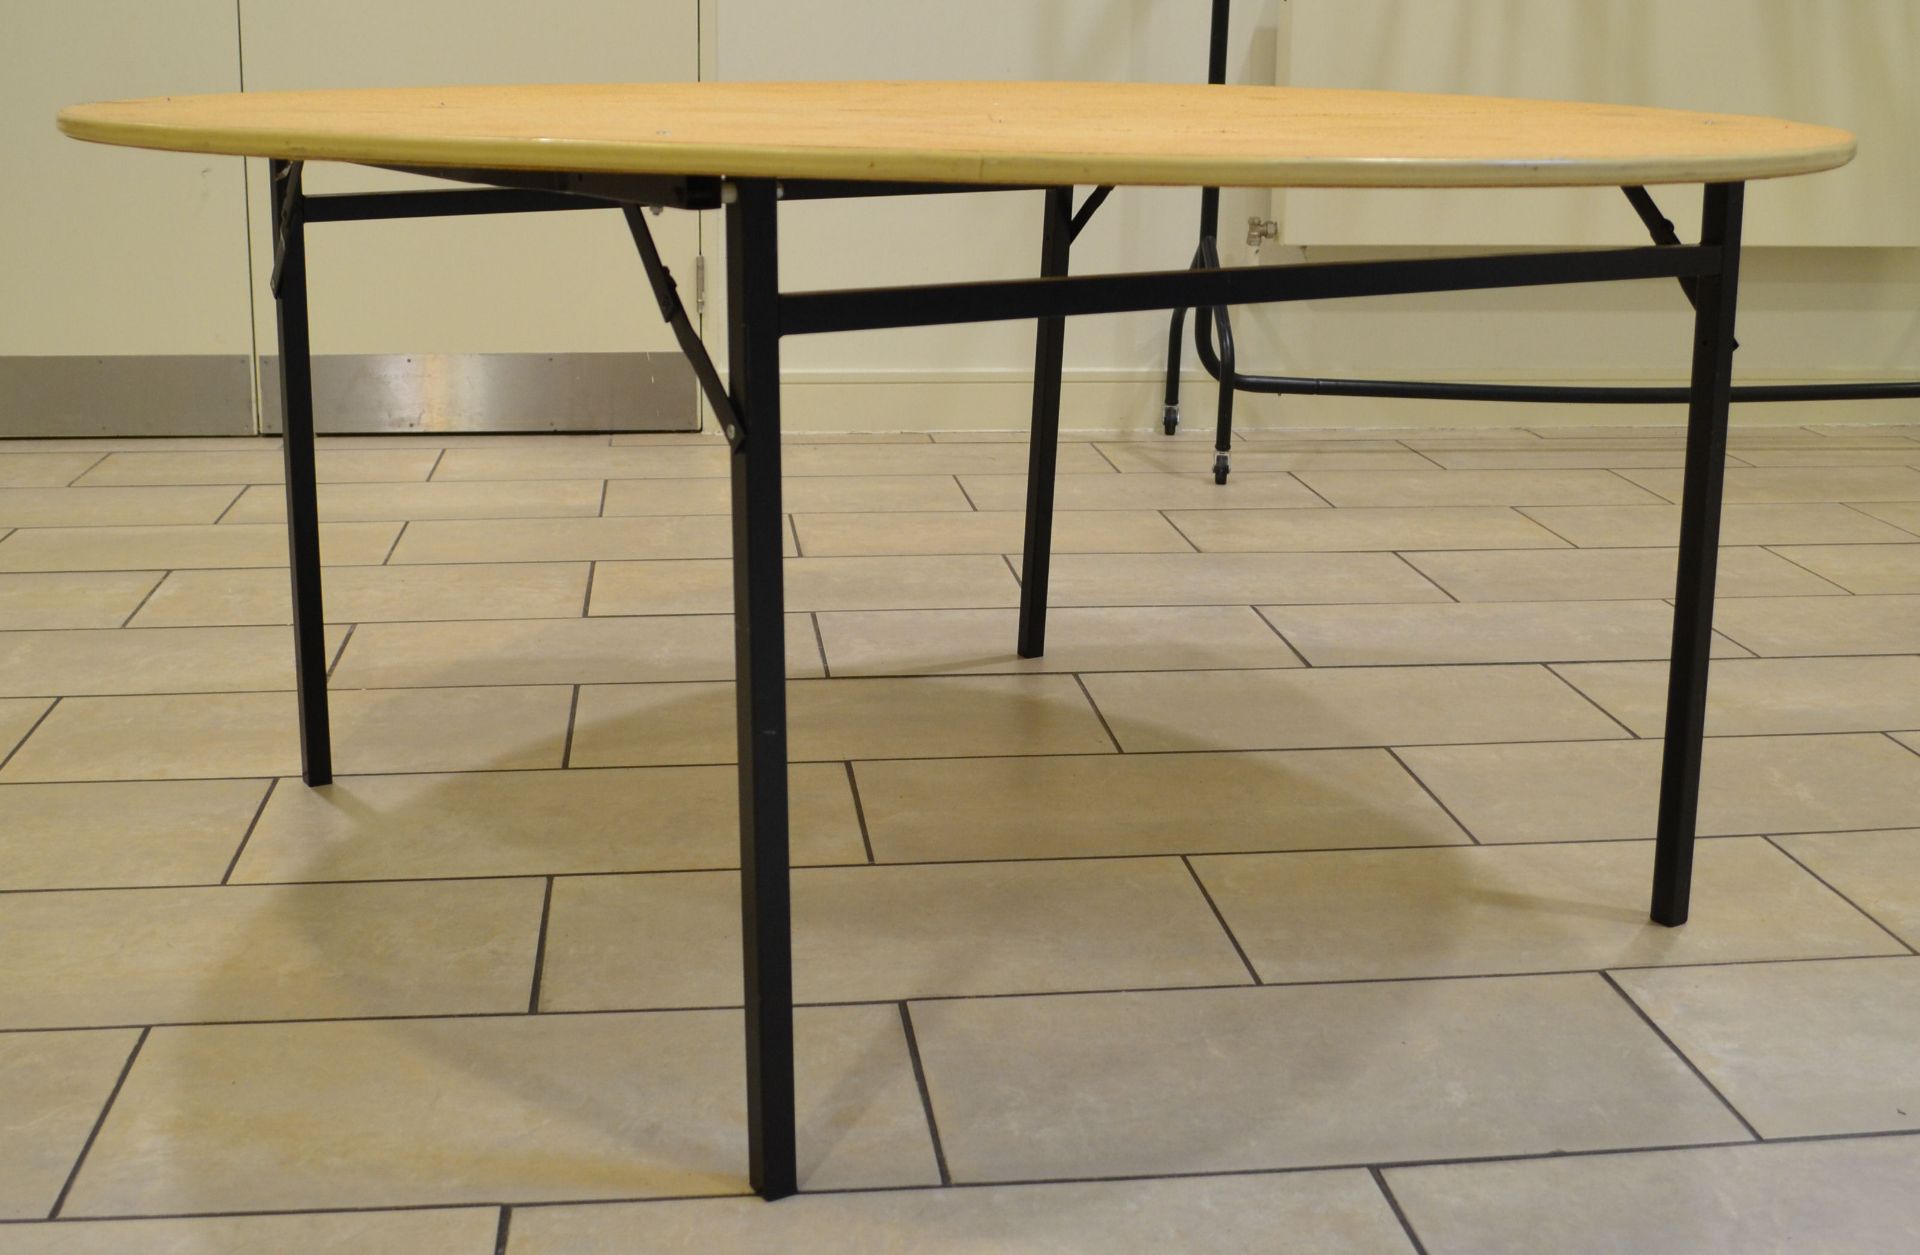 4 x 5 Foot Folding Round Banqueting Tables - CL152 - Location: Altrincham WA14 With a rubber-edged - Image 2 of 12